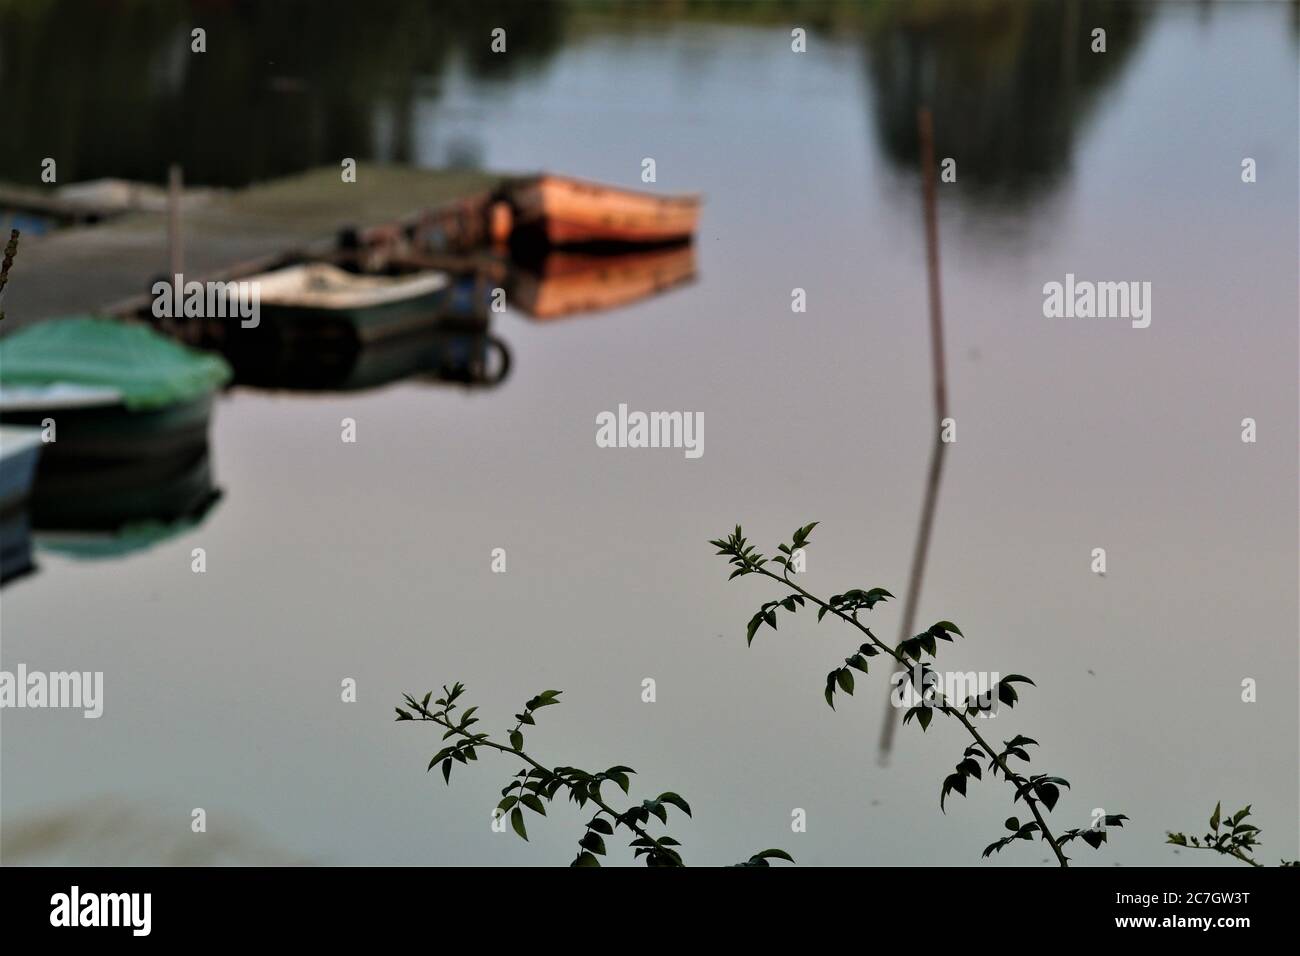 Thorn tendril in the foreground with row boats blurred as a background Stock Photo